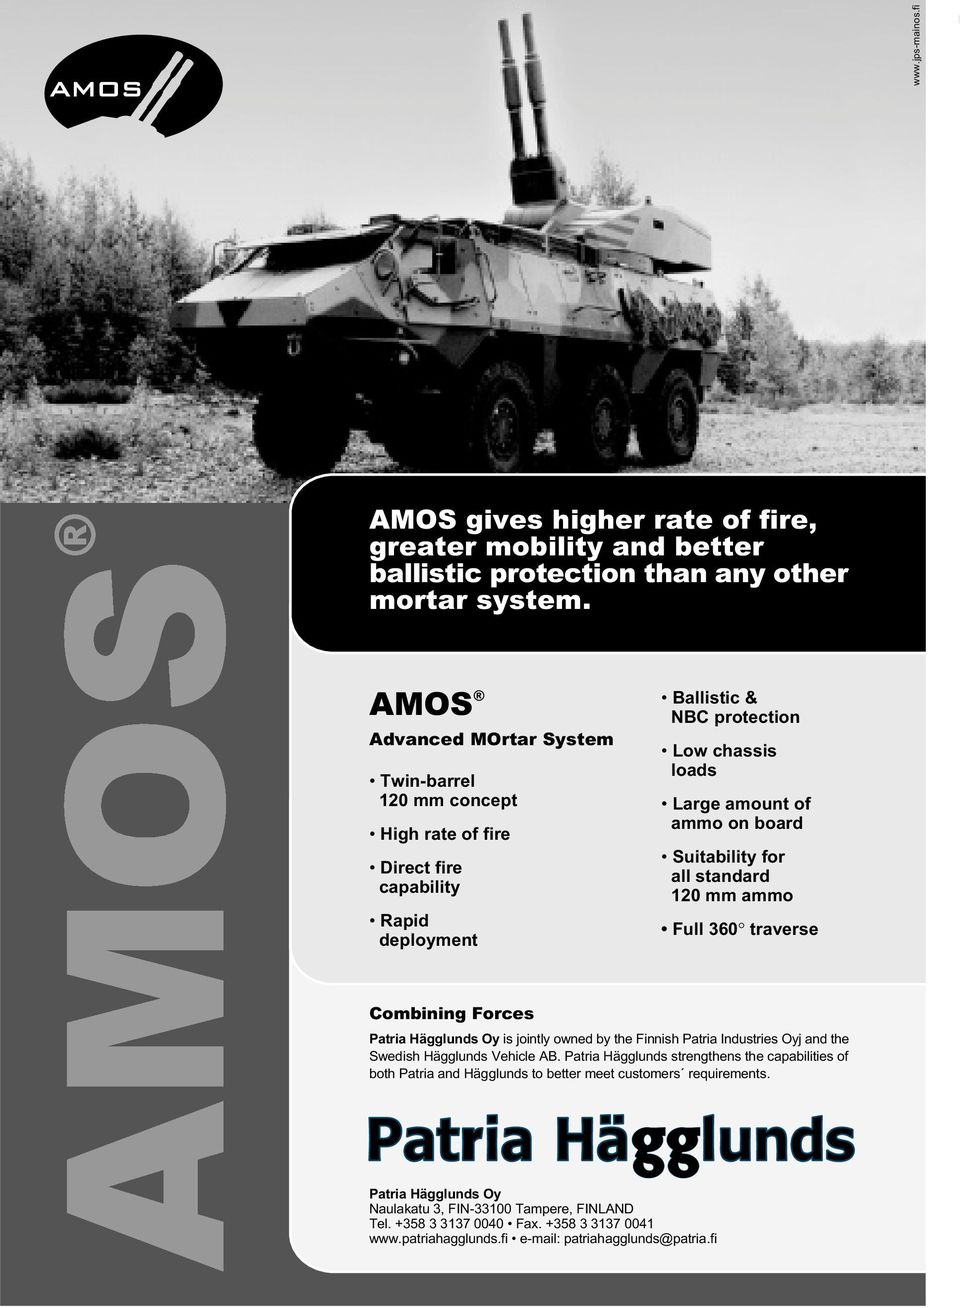 for all standard 120 mm ammo Full 360 traverse Combining Forces Patria Hägglunds Oy is jointly owned by the Finnish Patria Industries Oyj and the Swedish Hägglunds Vehicle AB.